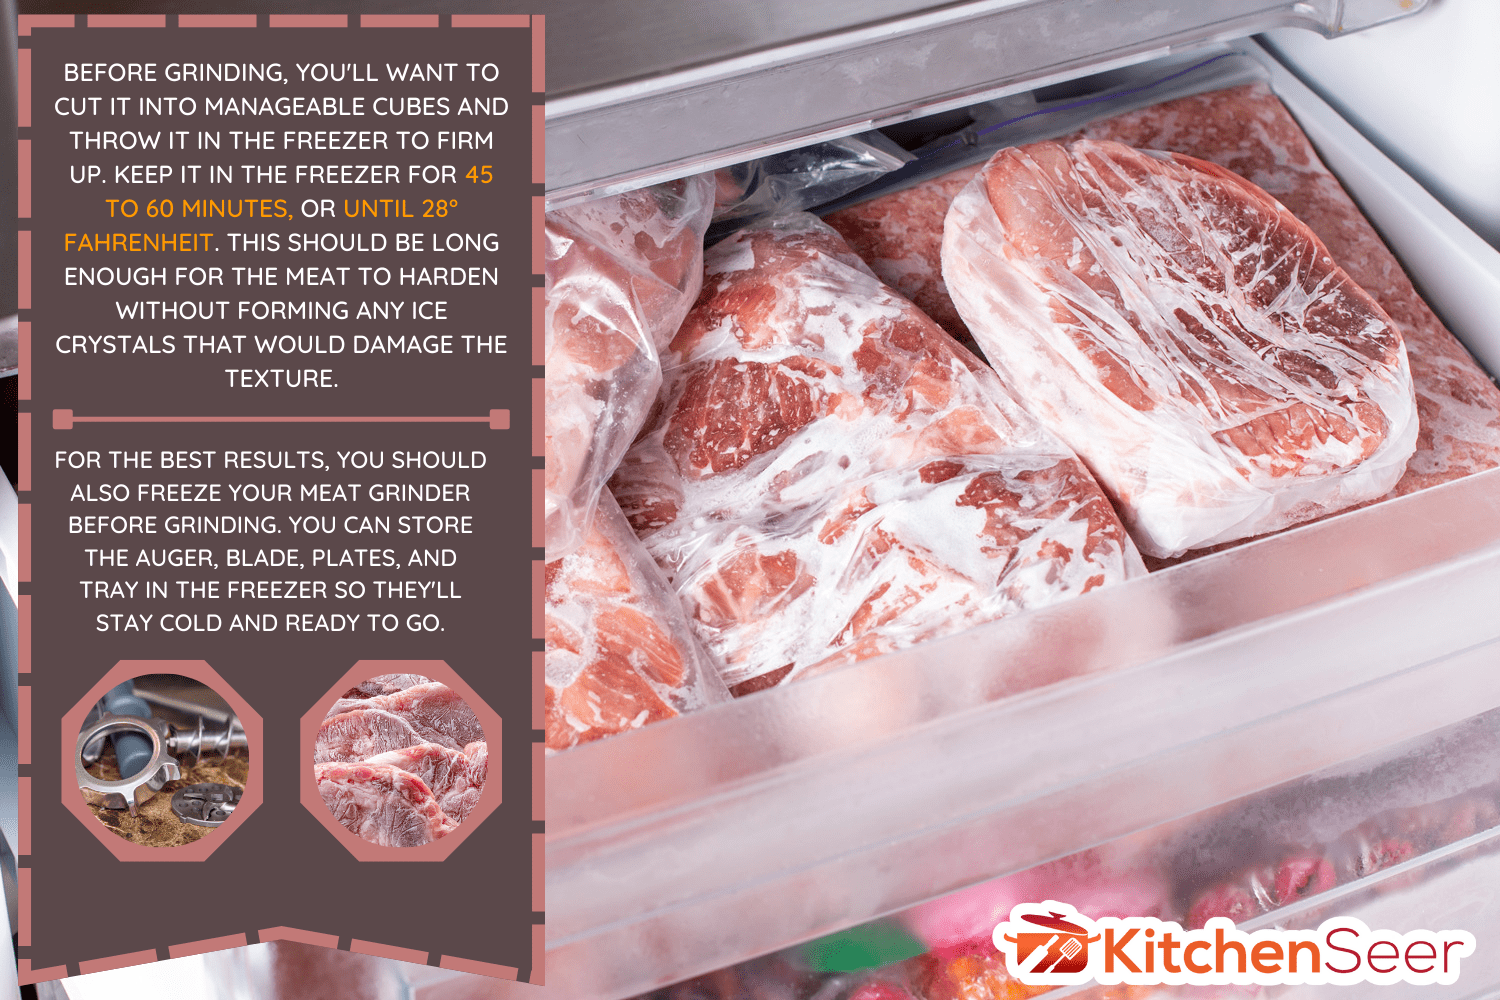 Raw frozen meat pieces. raw pork chops close-up texture. Fast freeze meat product - How Long to Freeze Meat Before Grinding or Slicing